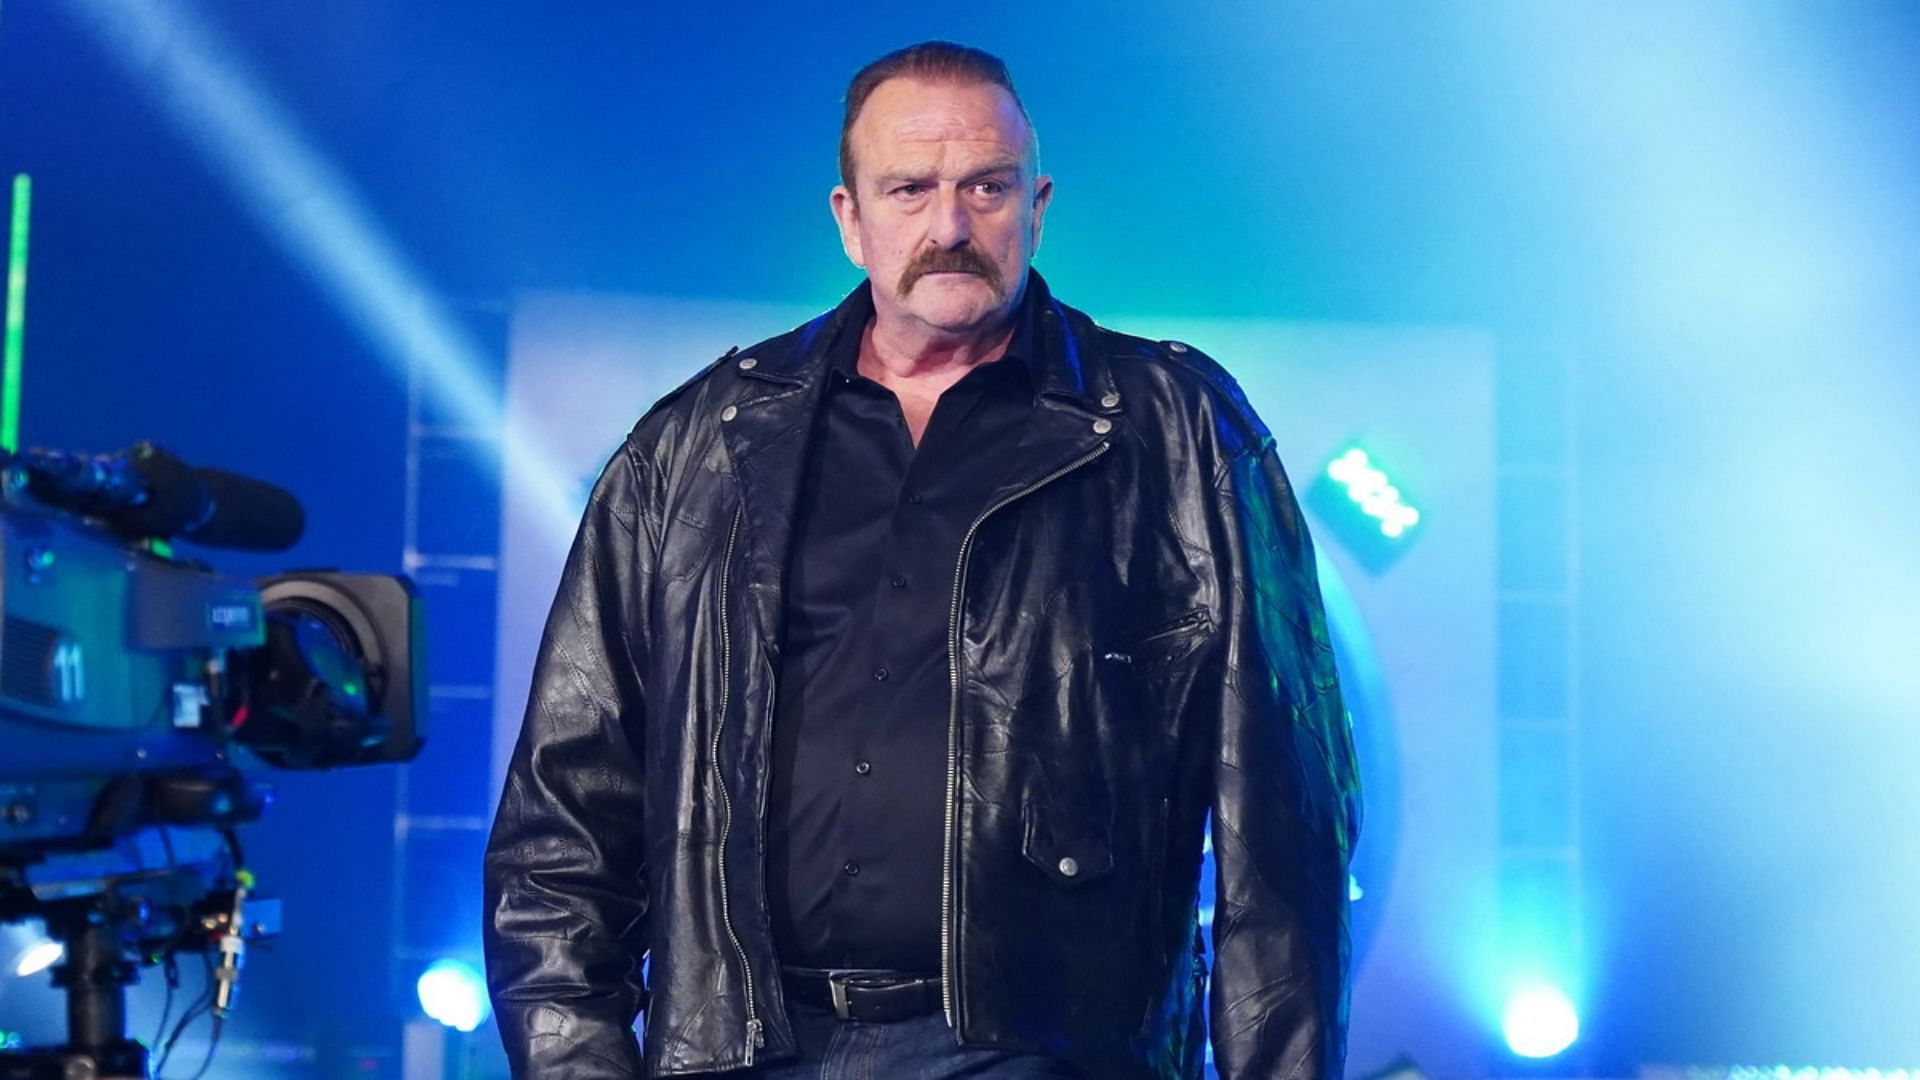 Jake Roberts was met with a surprise apology at the 2014 Hall of Fame ceremony